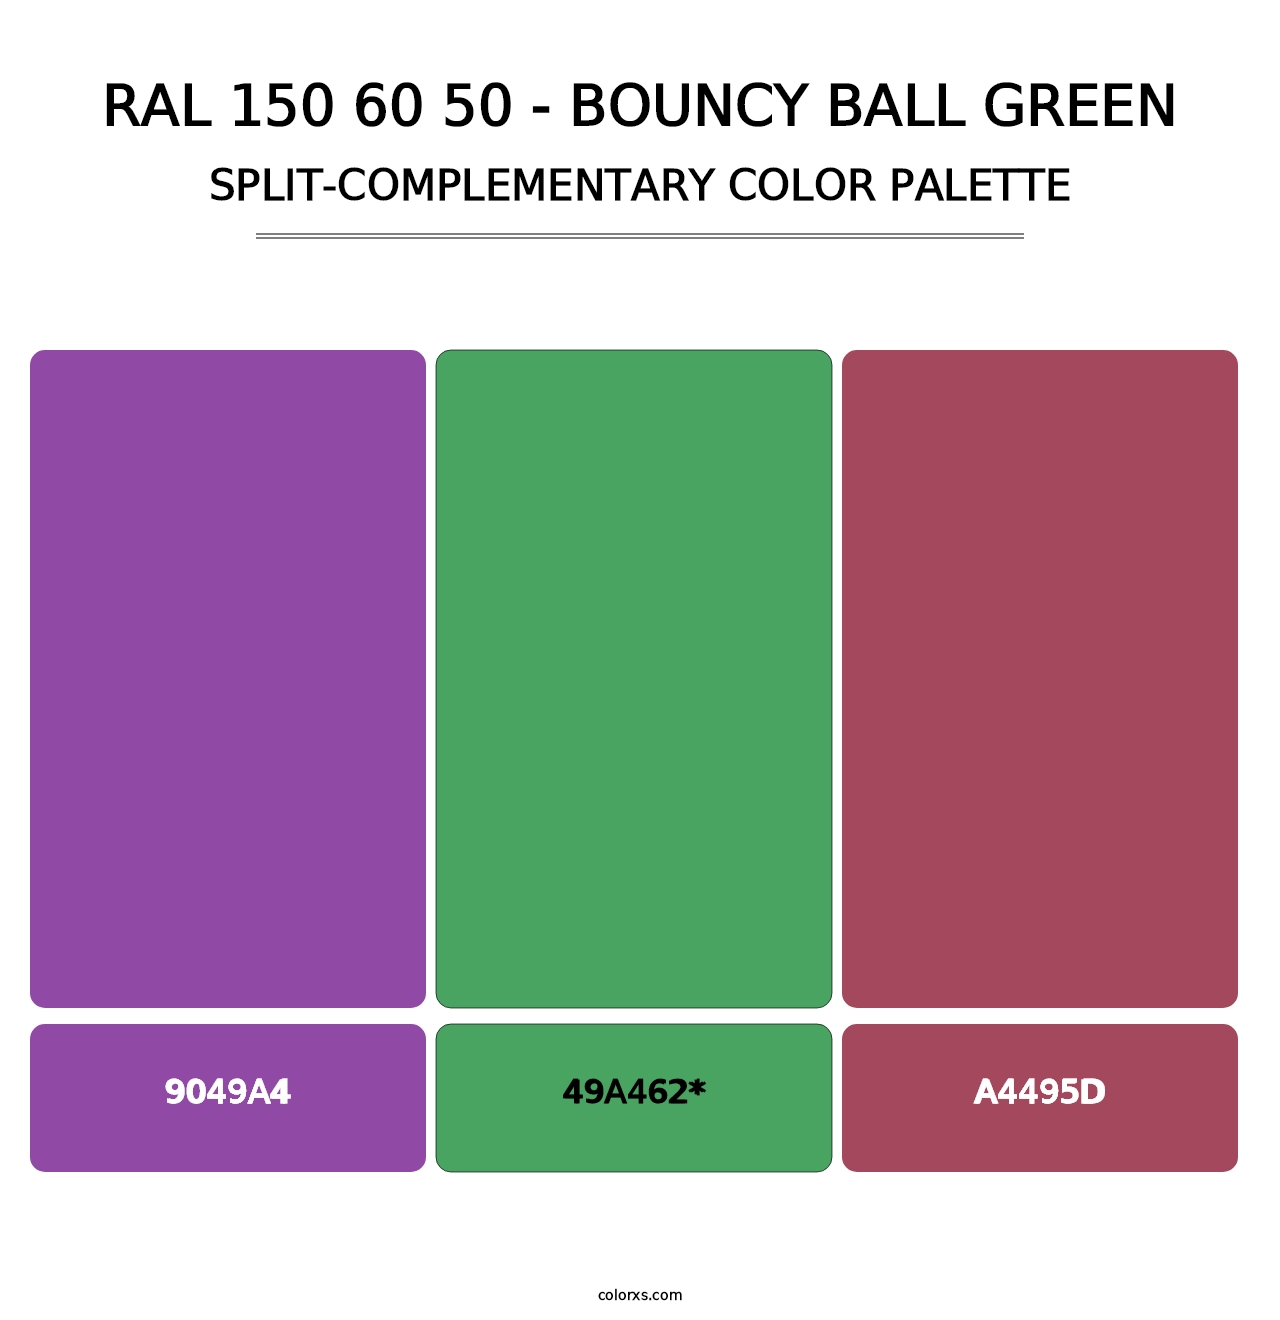 RAL 150 60 50 - Bouncy Ball Green - Split-Complementary Color Palette